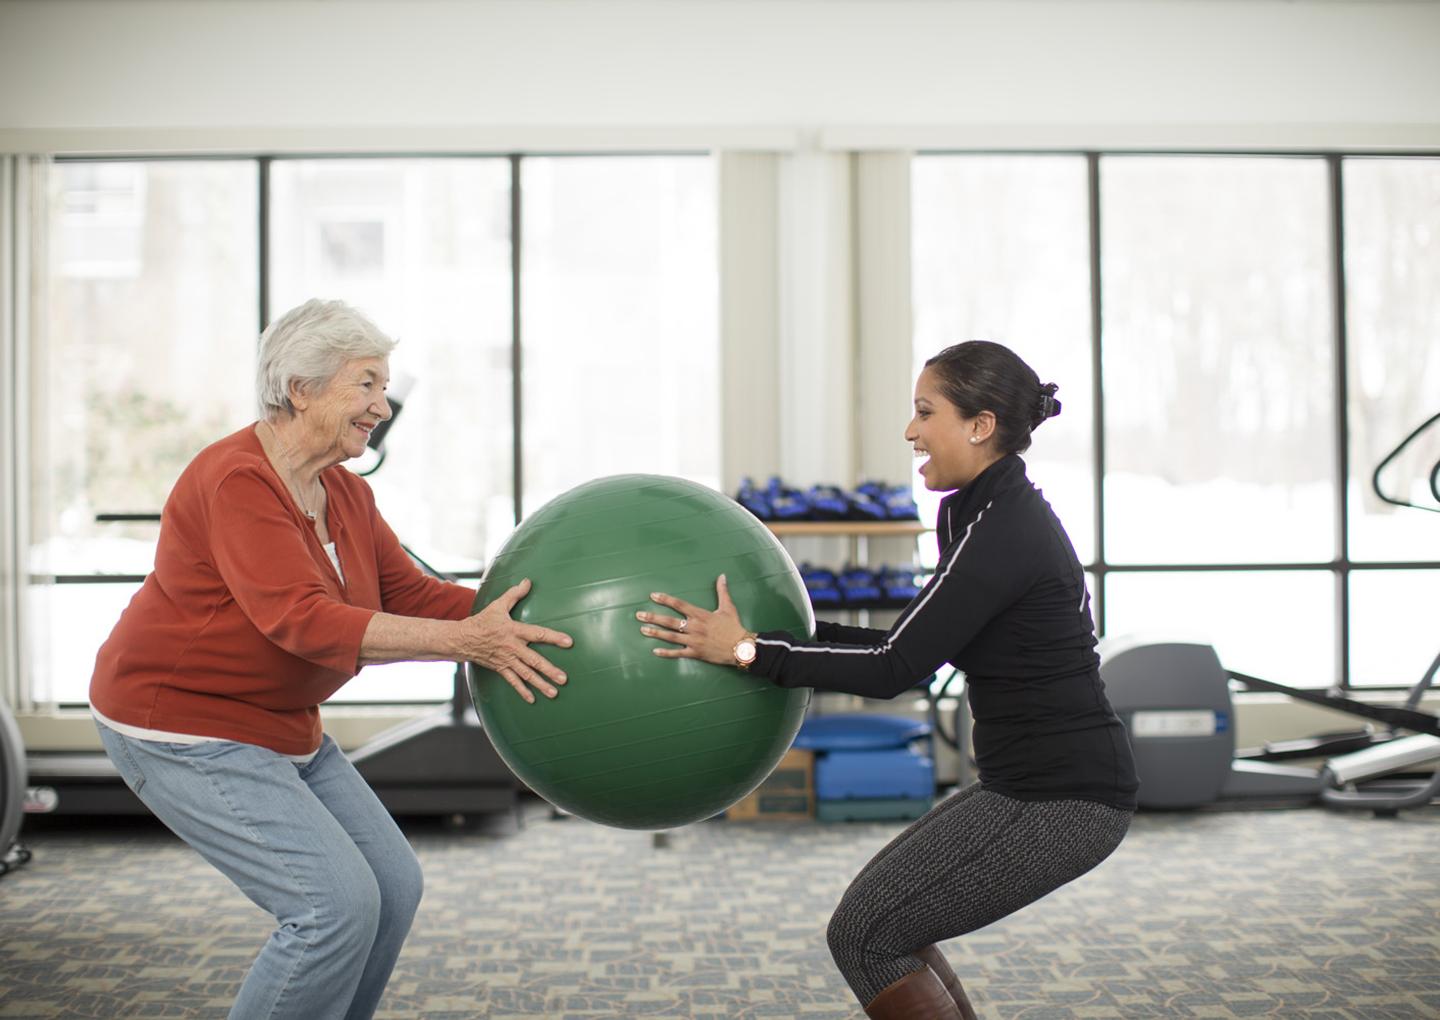 An older woman on the left and younger woman on the right stand facing each other, standing in a squat position, holding a large exercise ball between them. They are in a gym with large windows and exercise equipment in the background.